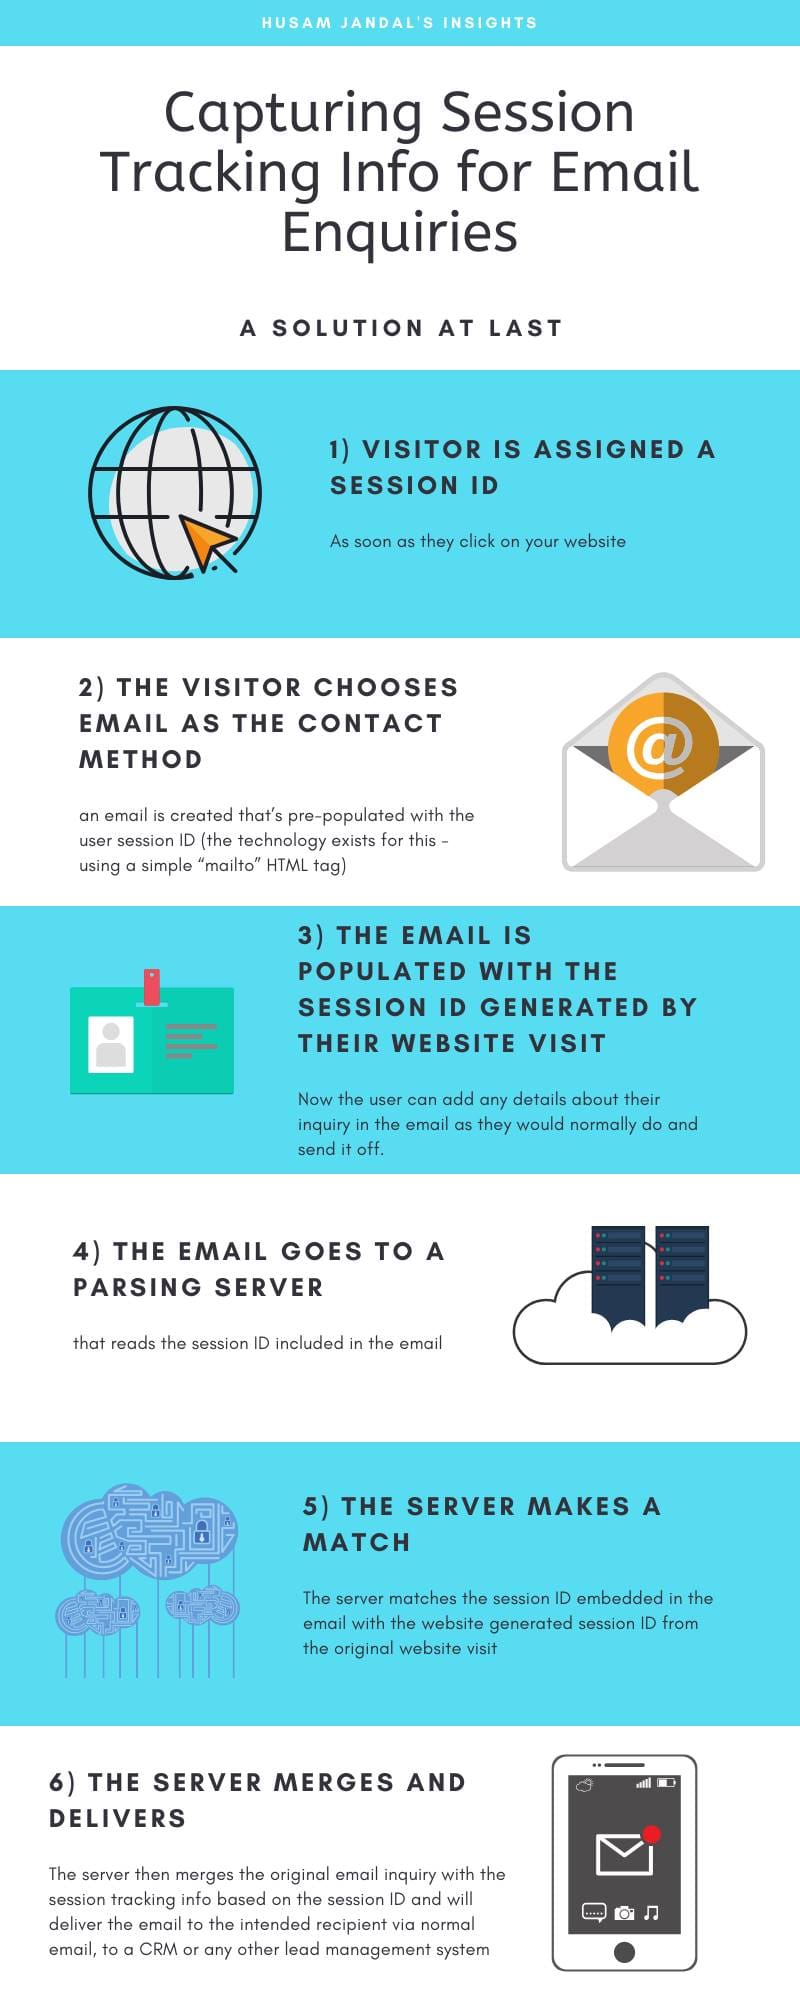 How to Capture Tracking Info for Email Enquiries including UTM data